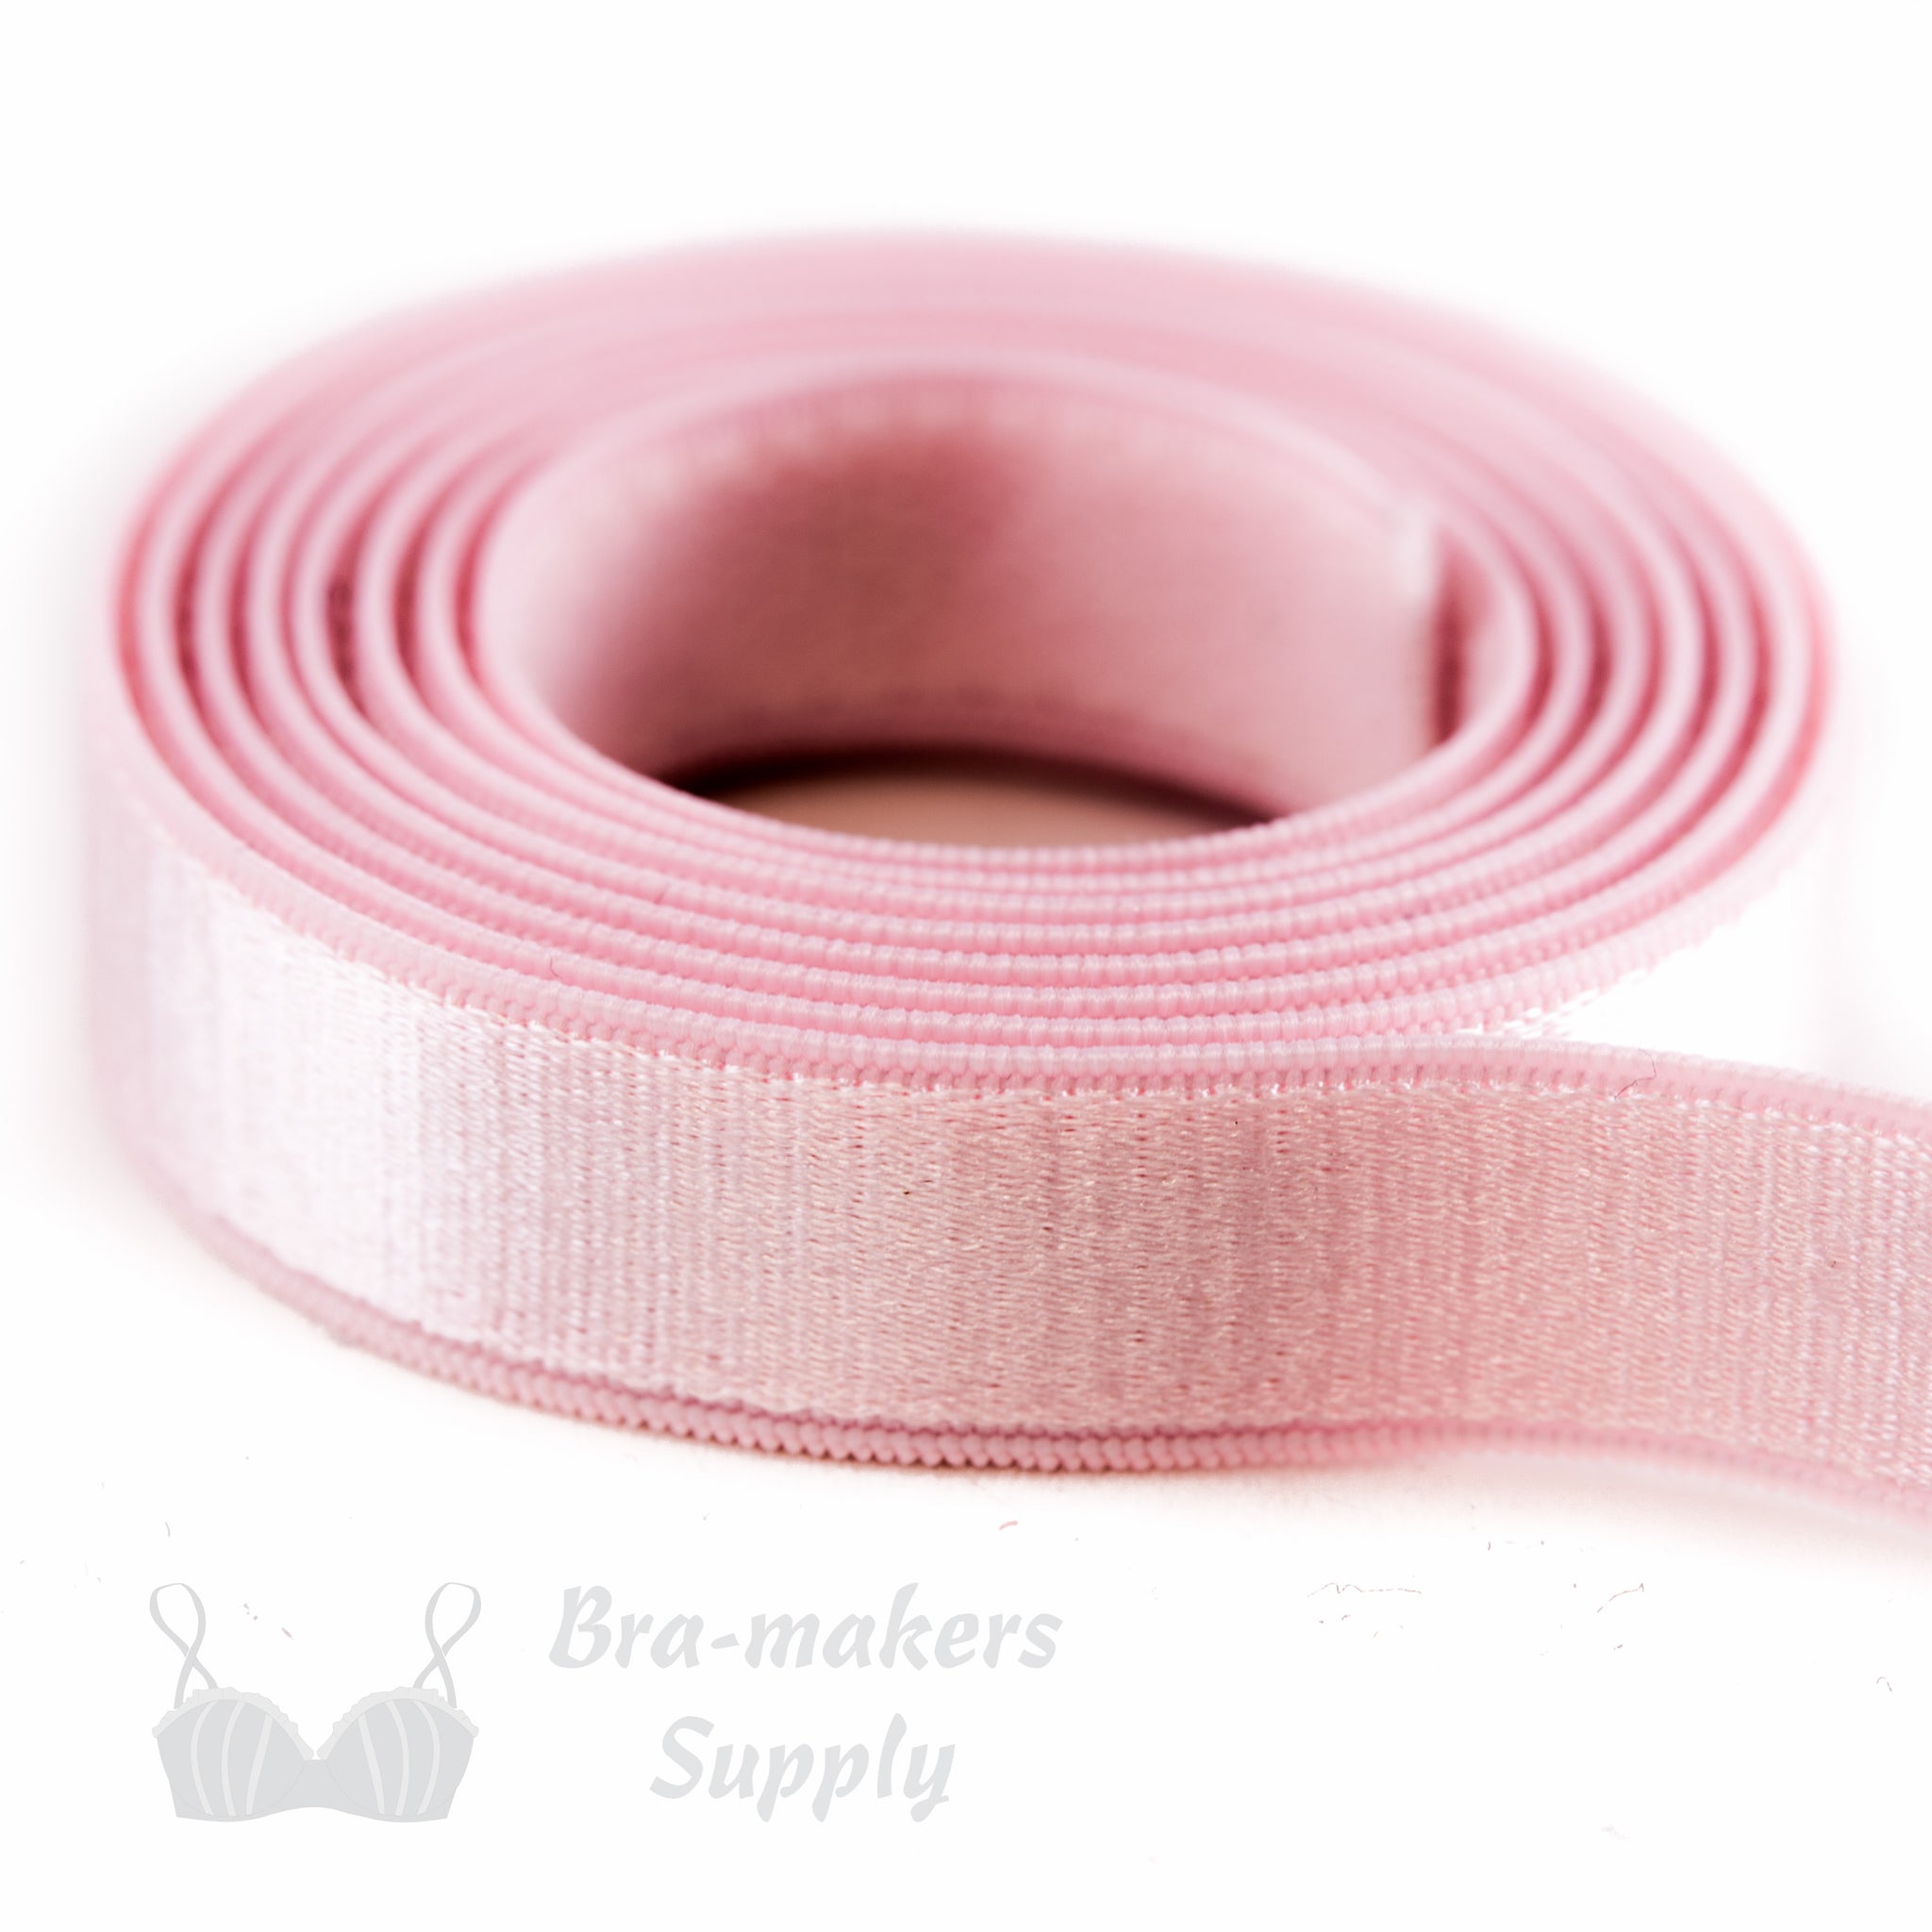 Wholesale Decorative Bra Strap Covers Products at Factory Prices